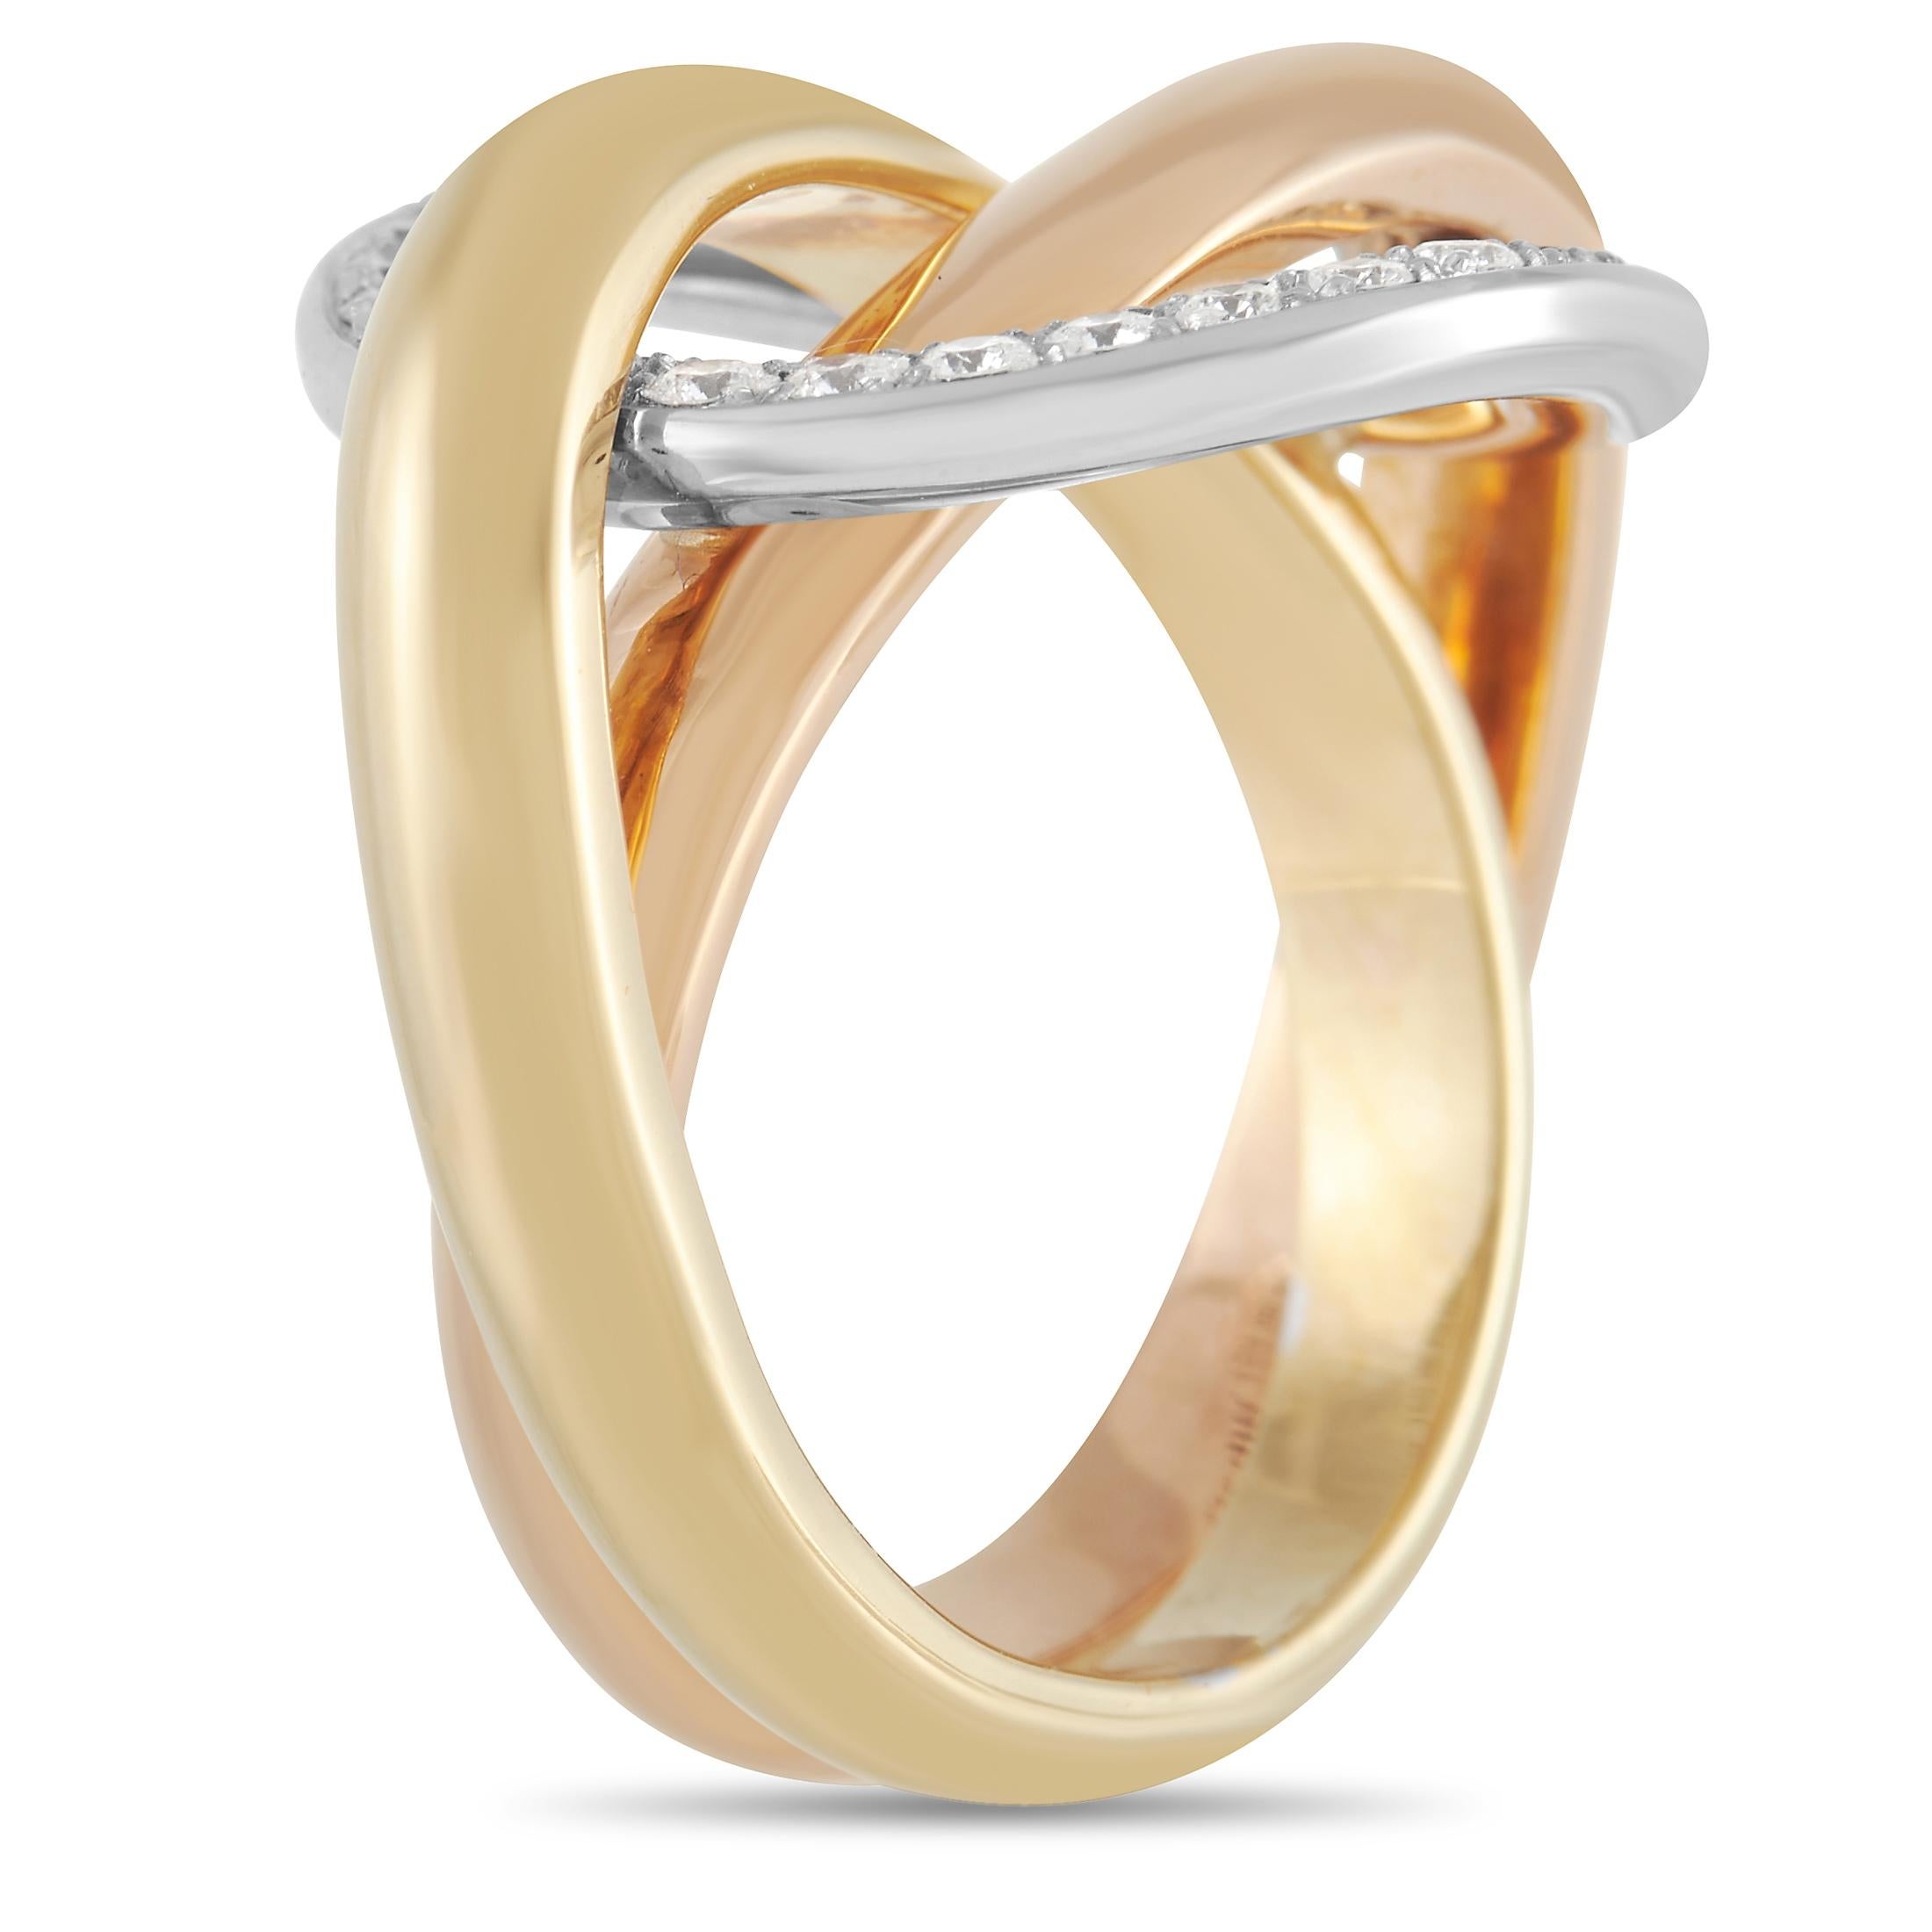 This elegant Crash ring from the Cartier Trinity collection is a celebration of form, color, and design. An opulent combination 18K Yellow Gold, White Gold, and Rose Gold come together in perfect harmony on this piece, which features a trio of